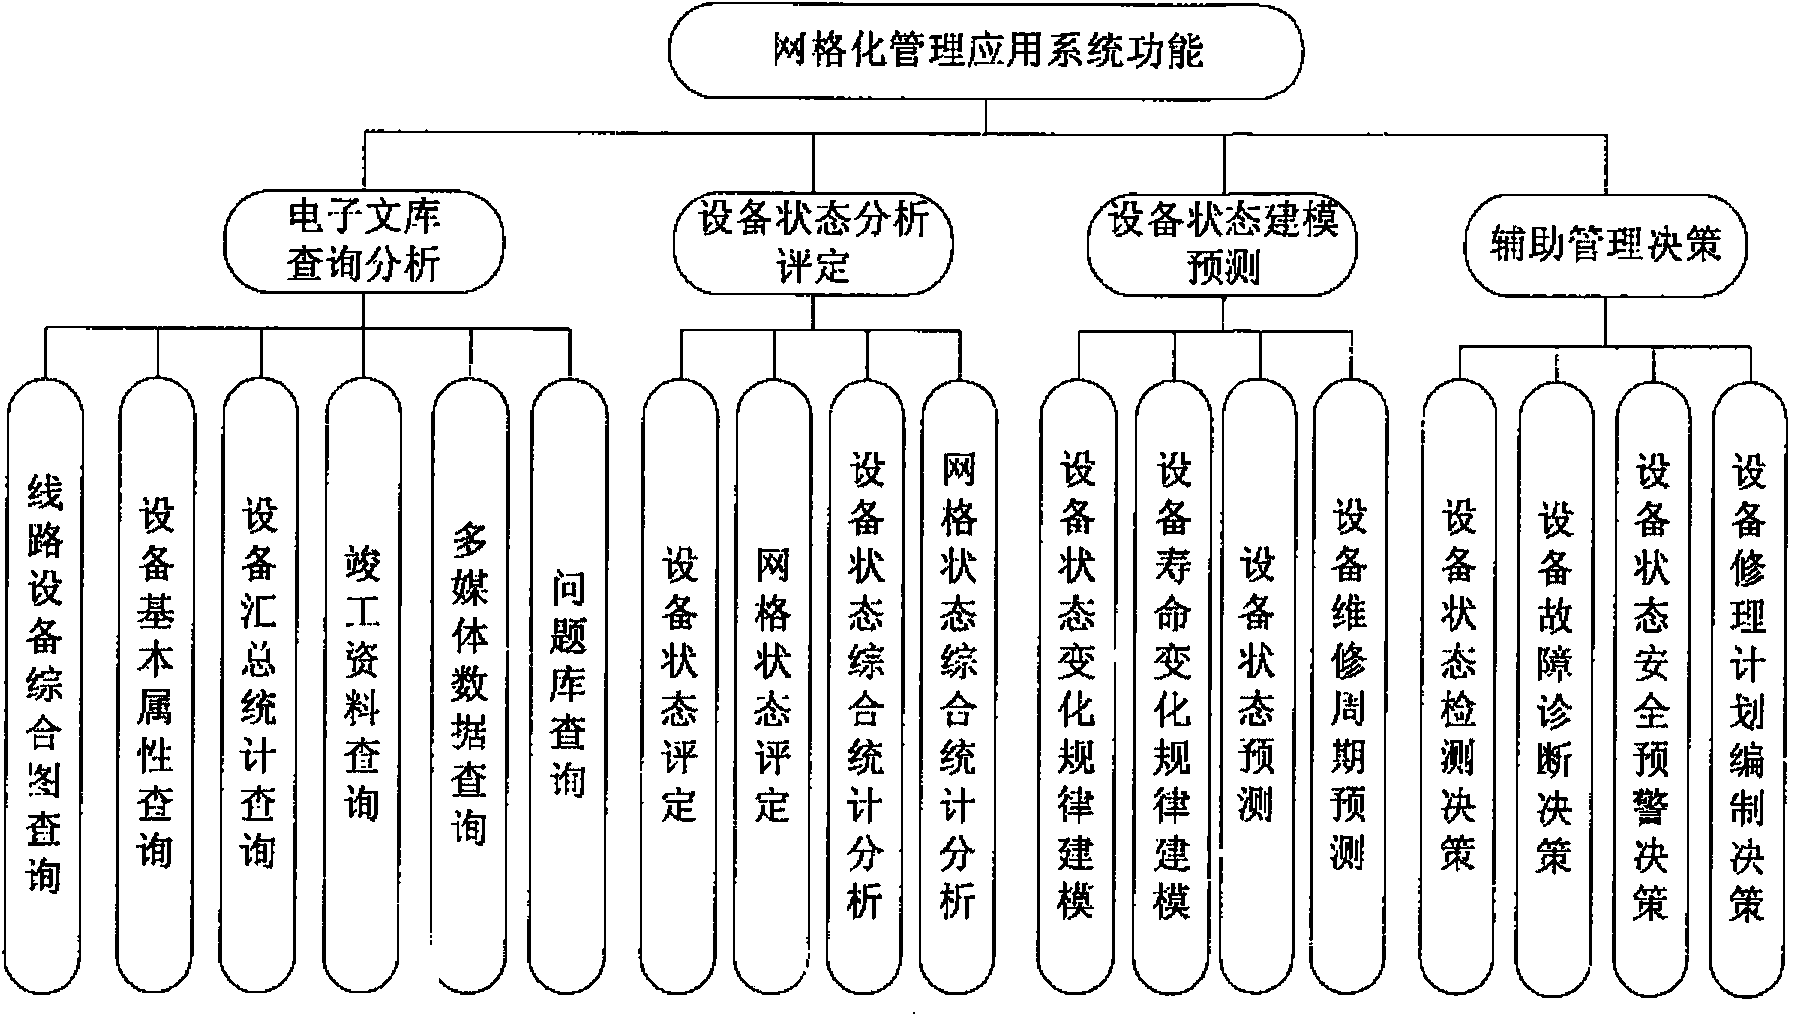 Grid management system and grid management method of high-speed railway train operation fixed equipment